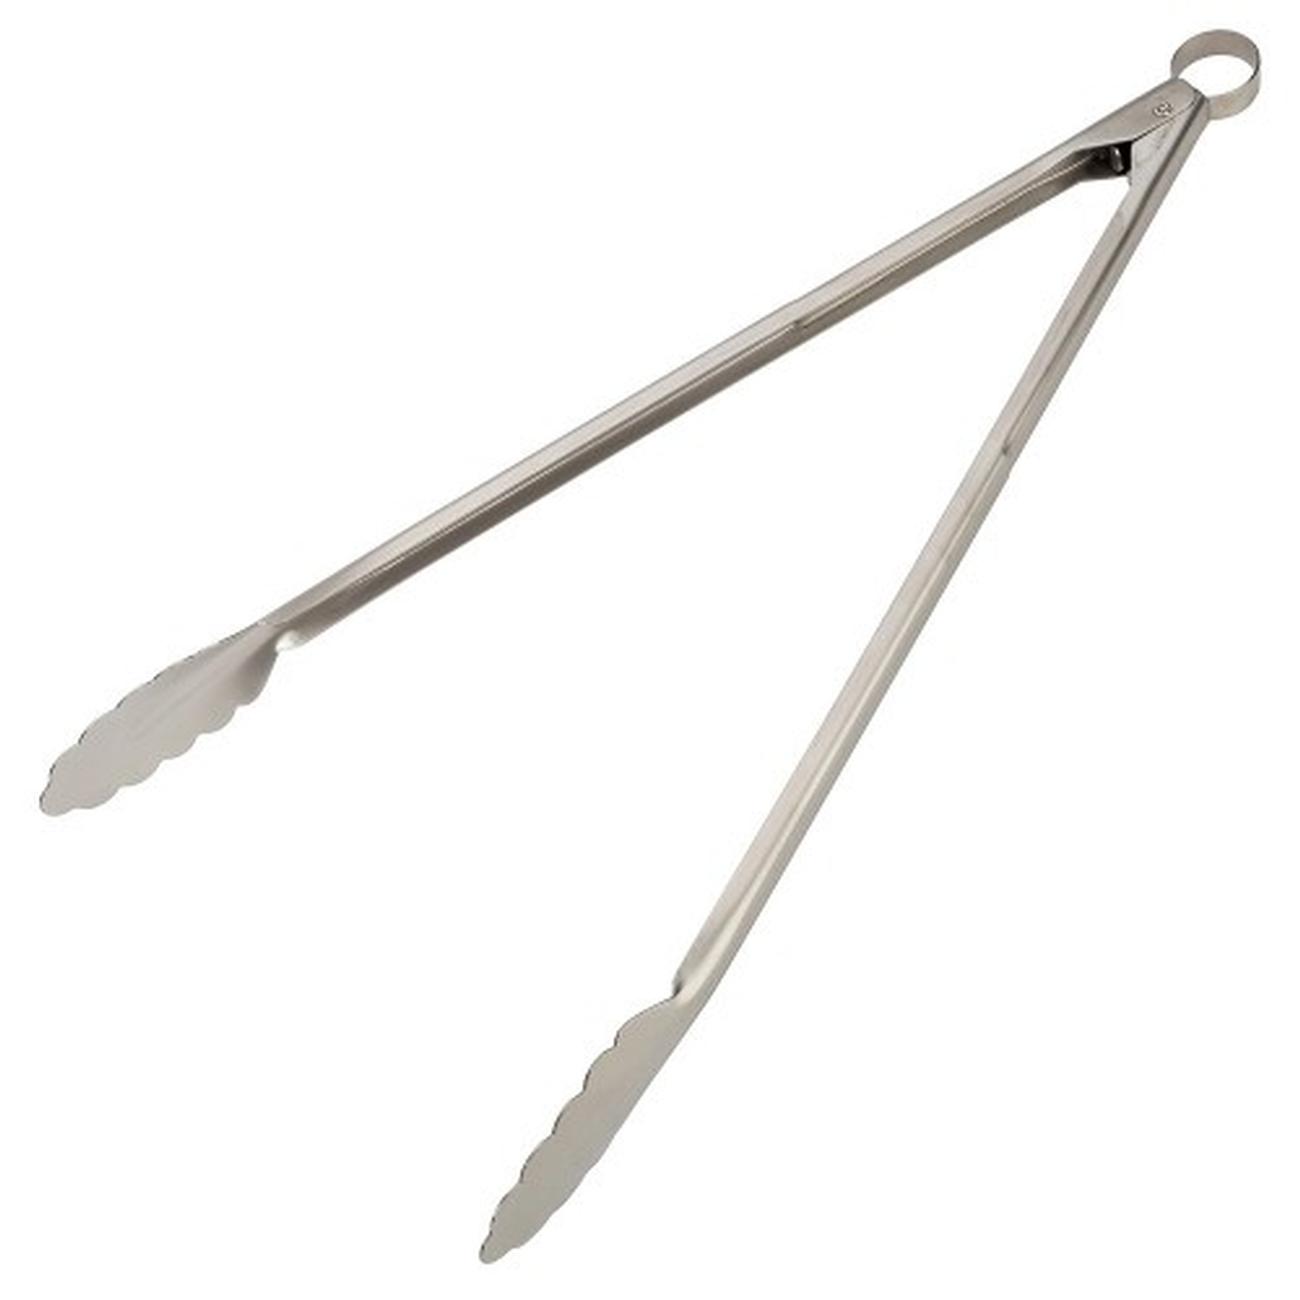 https://www.thekitchenwhisk.ie/contentFiles/productImages/Large/Cuisipro-Locking-Tongs-40cm-Stainless-Steel.jpg